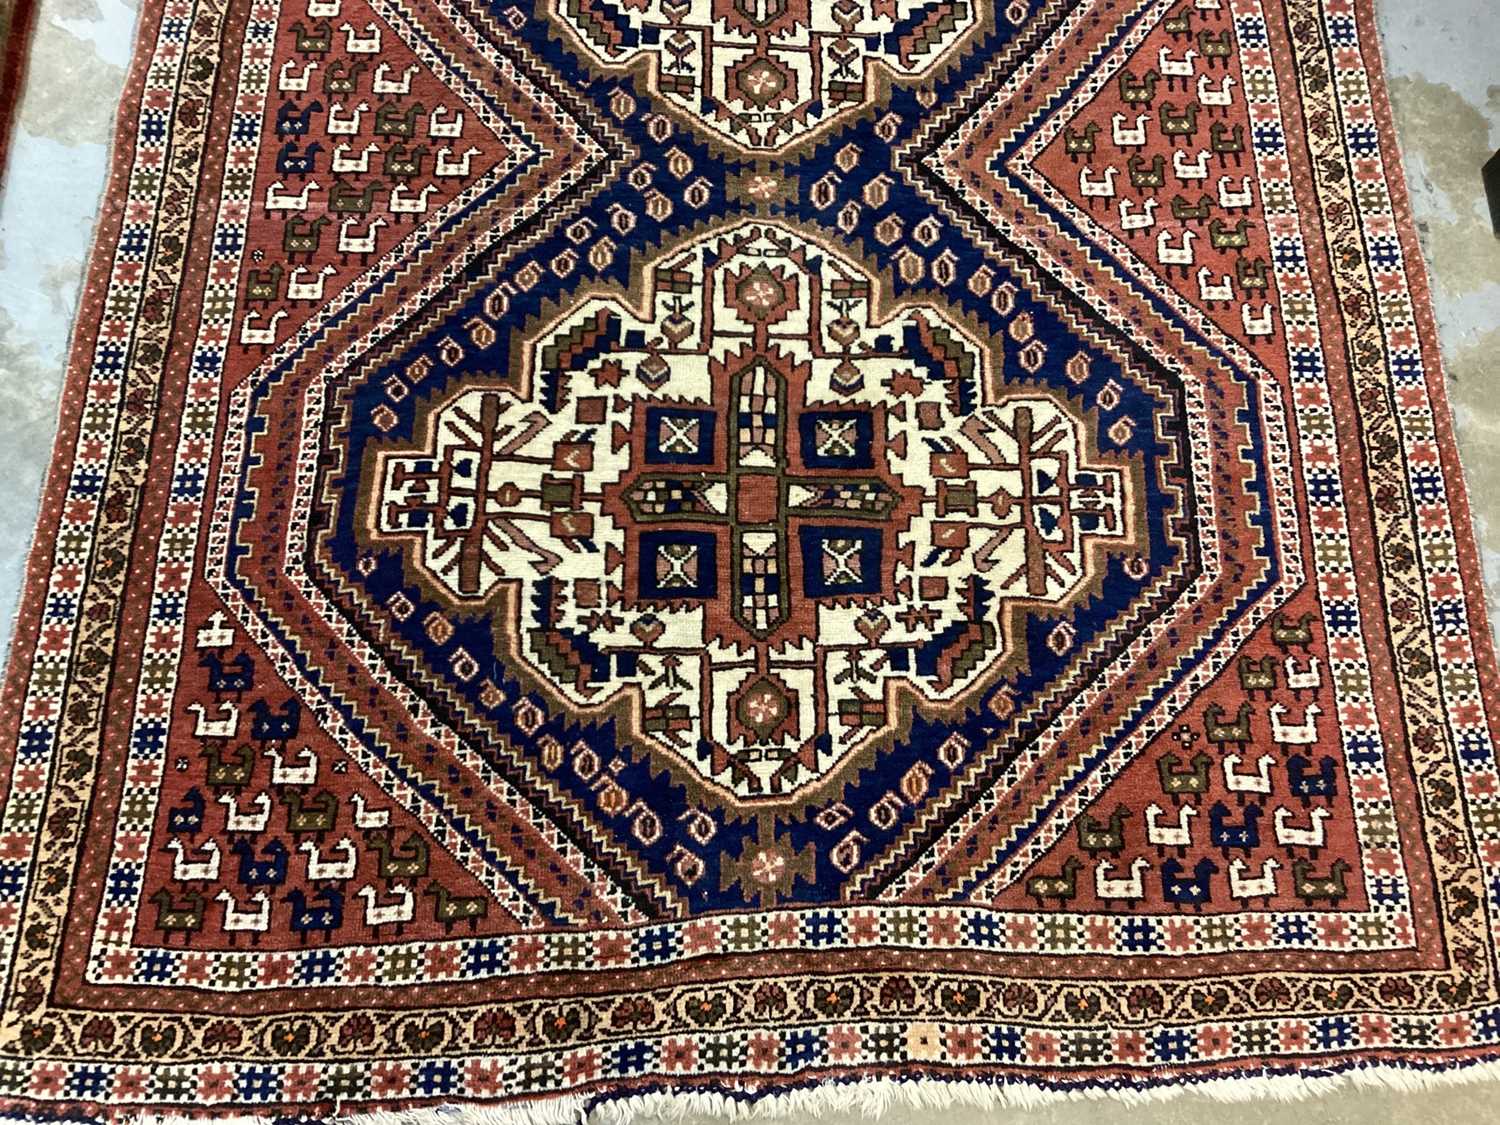 North West Persian rug - Image 2 of 6